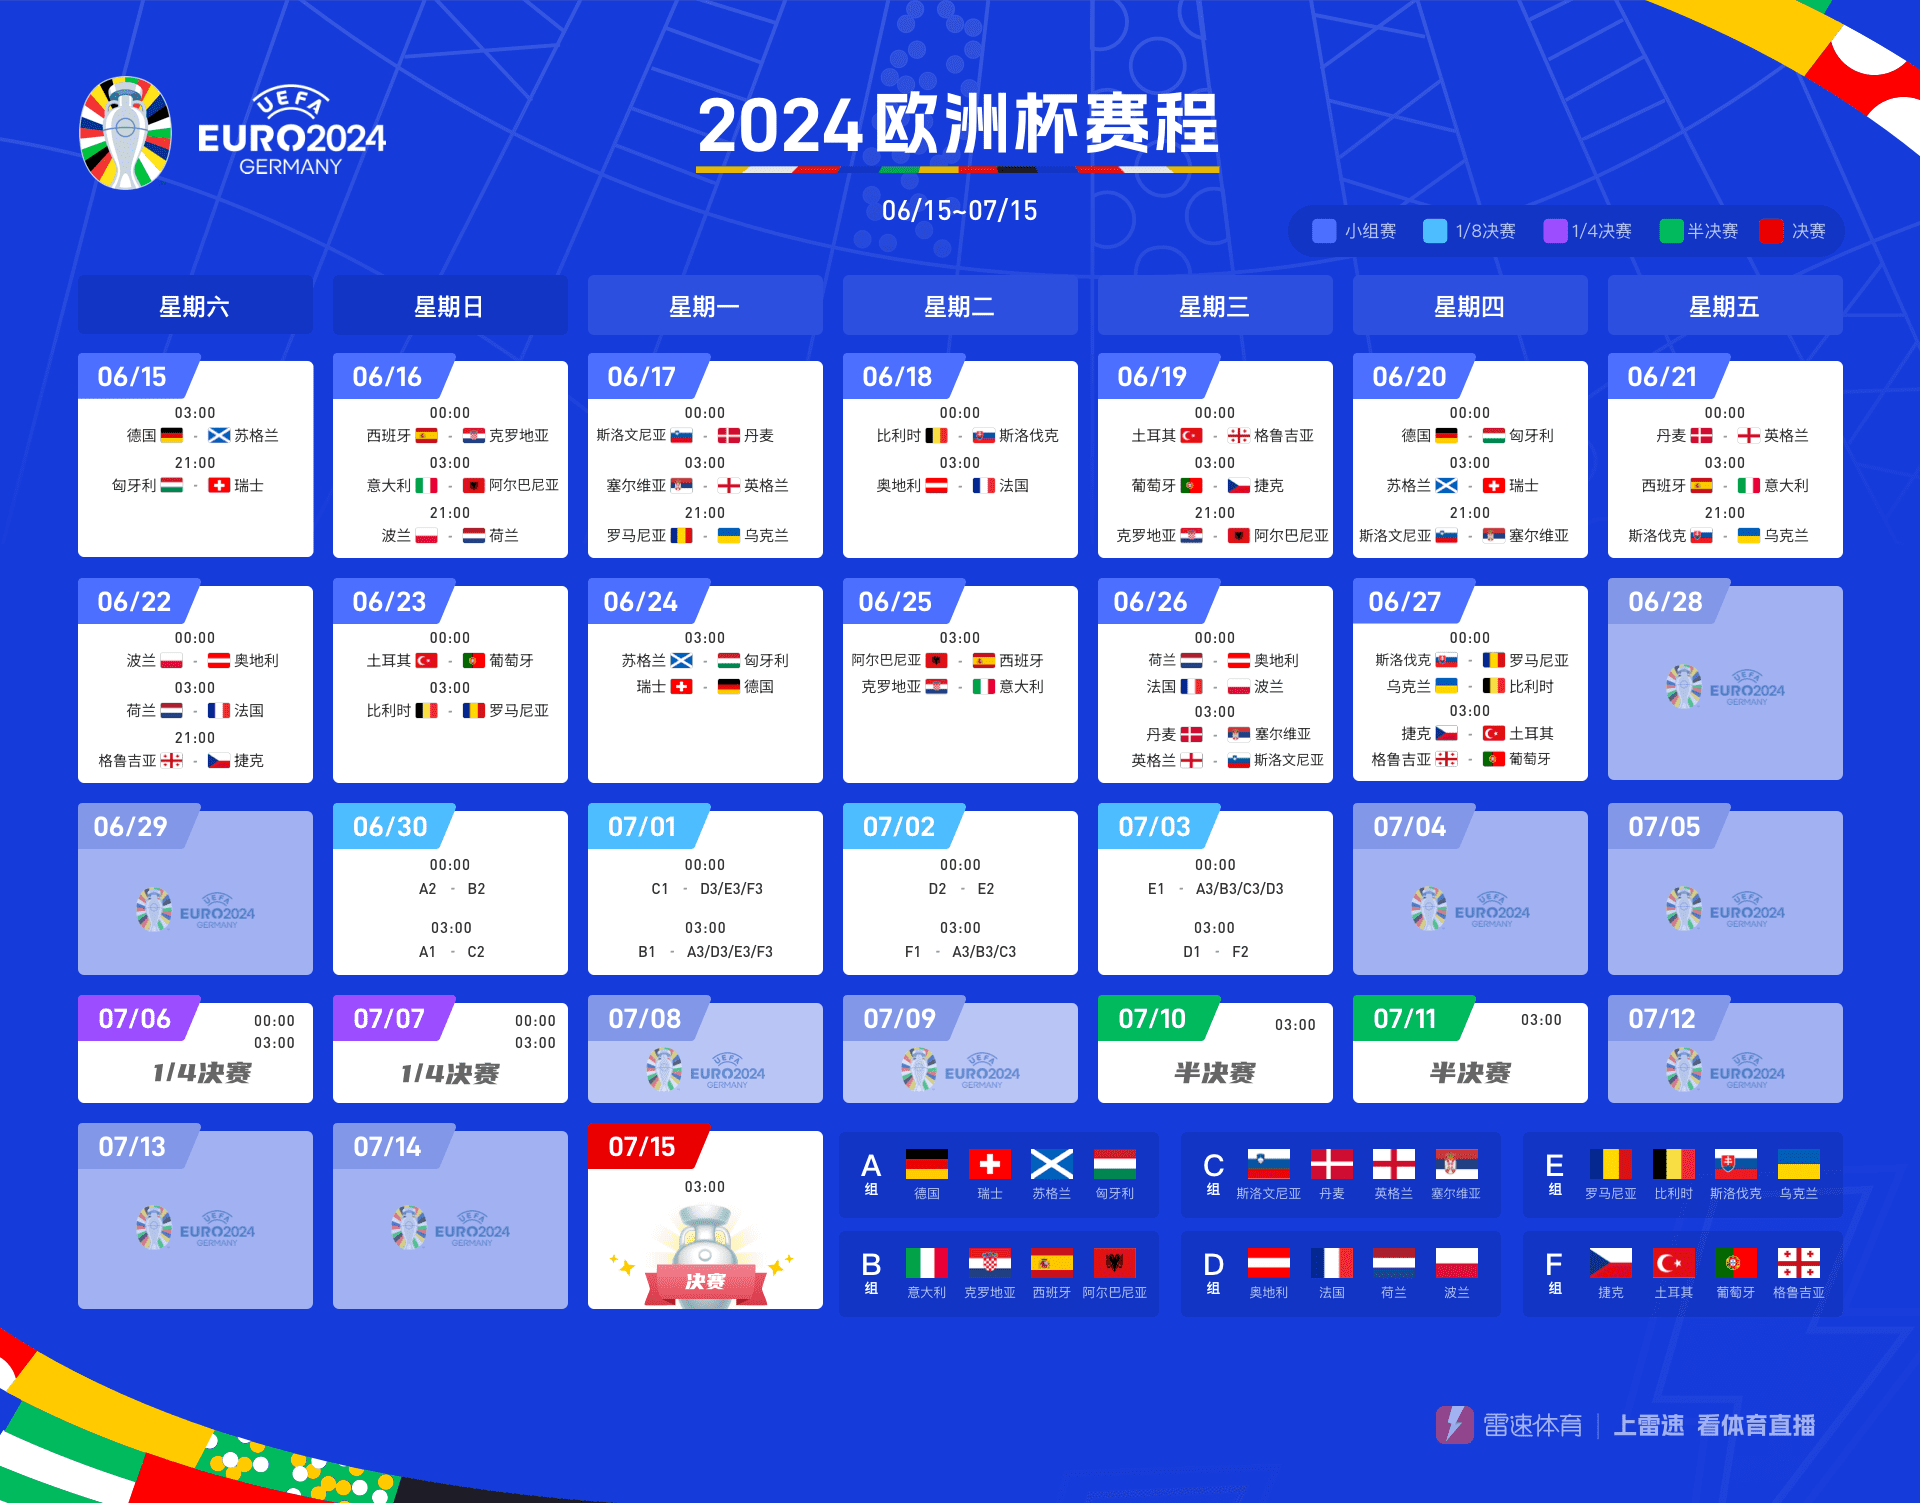 Understanding the UEFA Euro 2024 in One Article: Your Comprehensive Guide to the Tournament